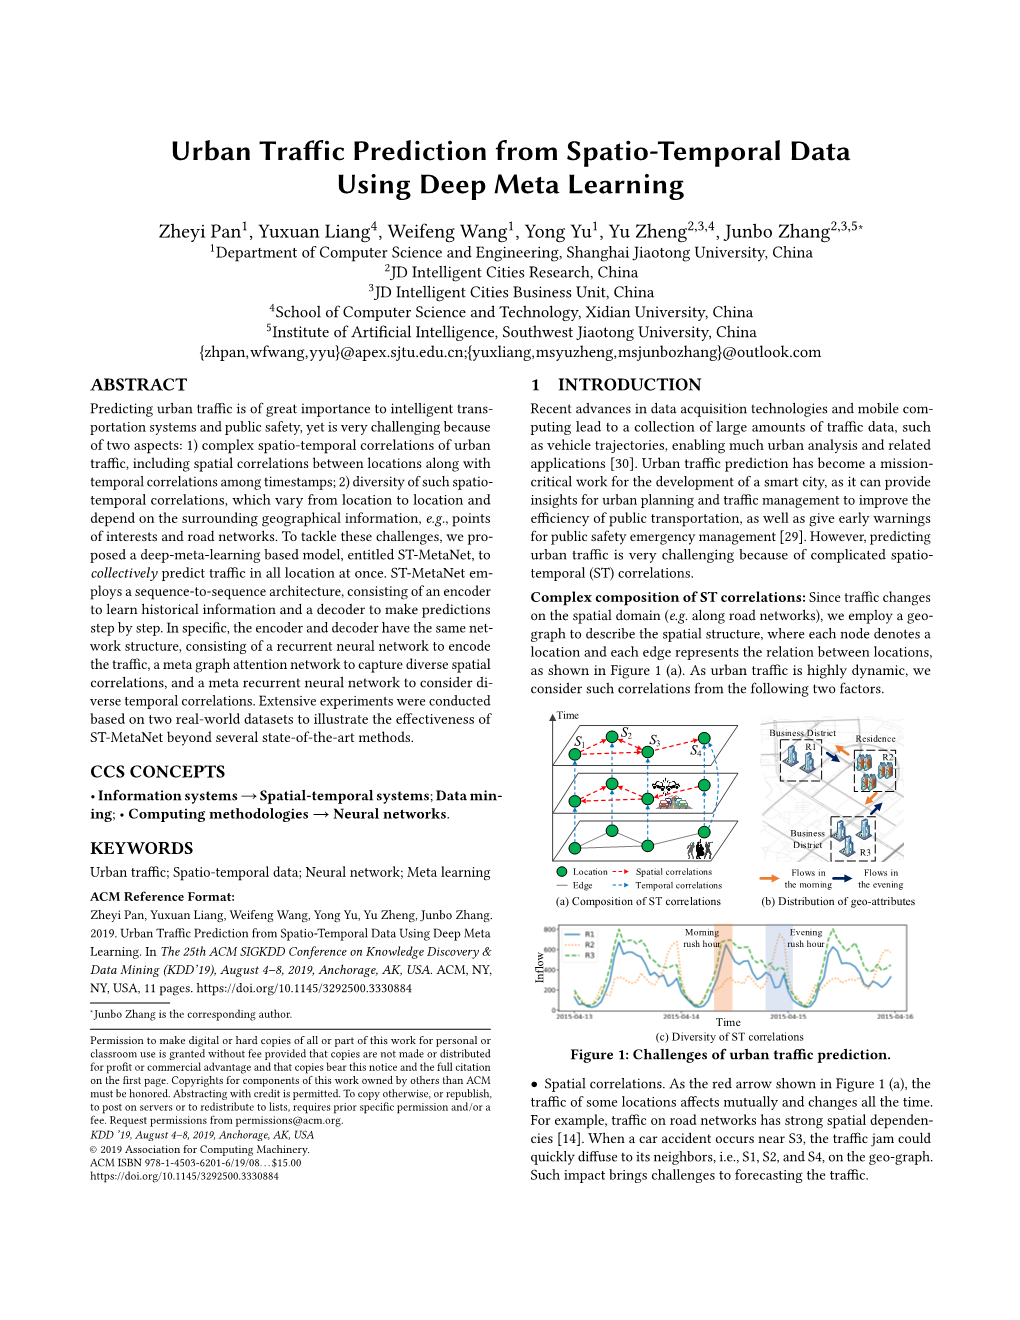 Urban Traffic Prediction from Spatio-Temporal Data Using Deep Meta Learning